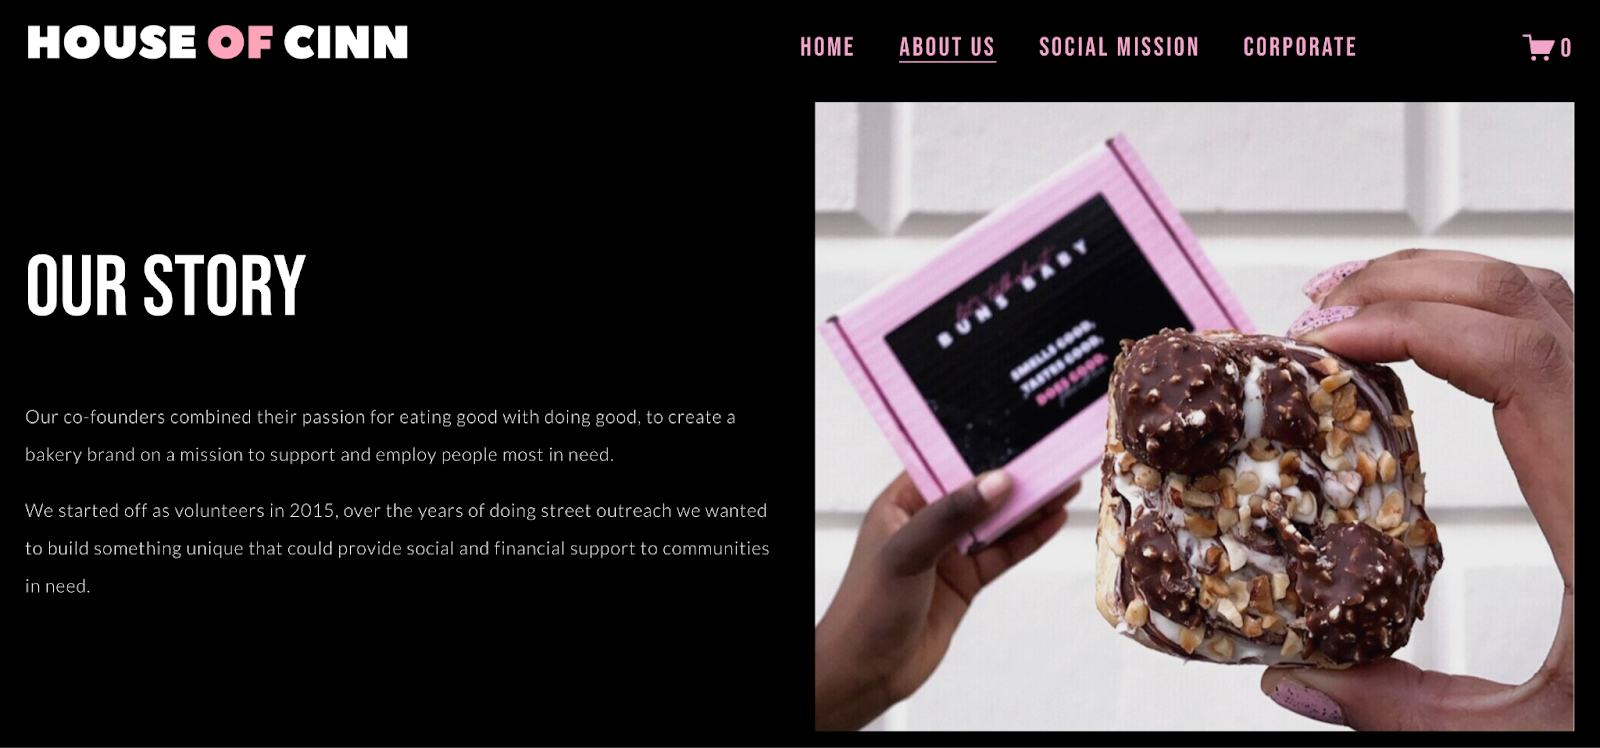 Screenshot of House of Cinn bakery's brand story and how it supports communities in need. 